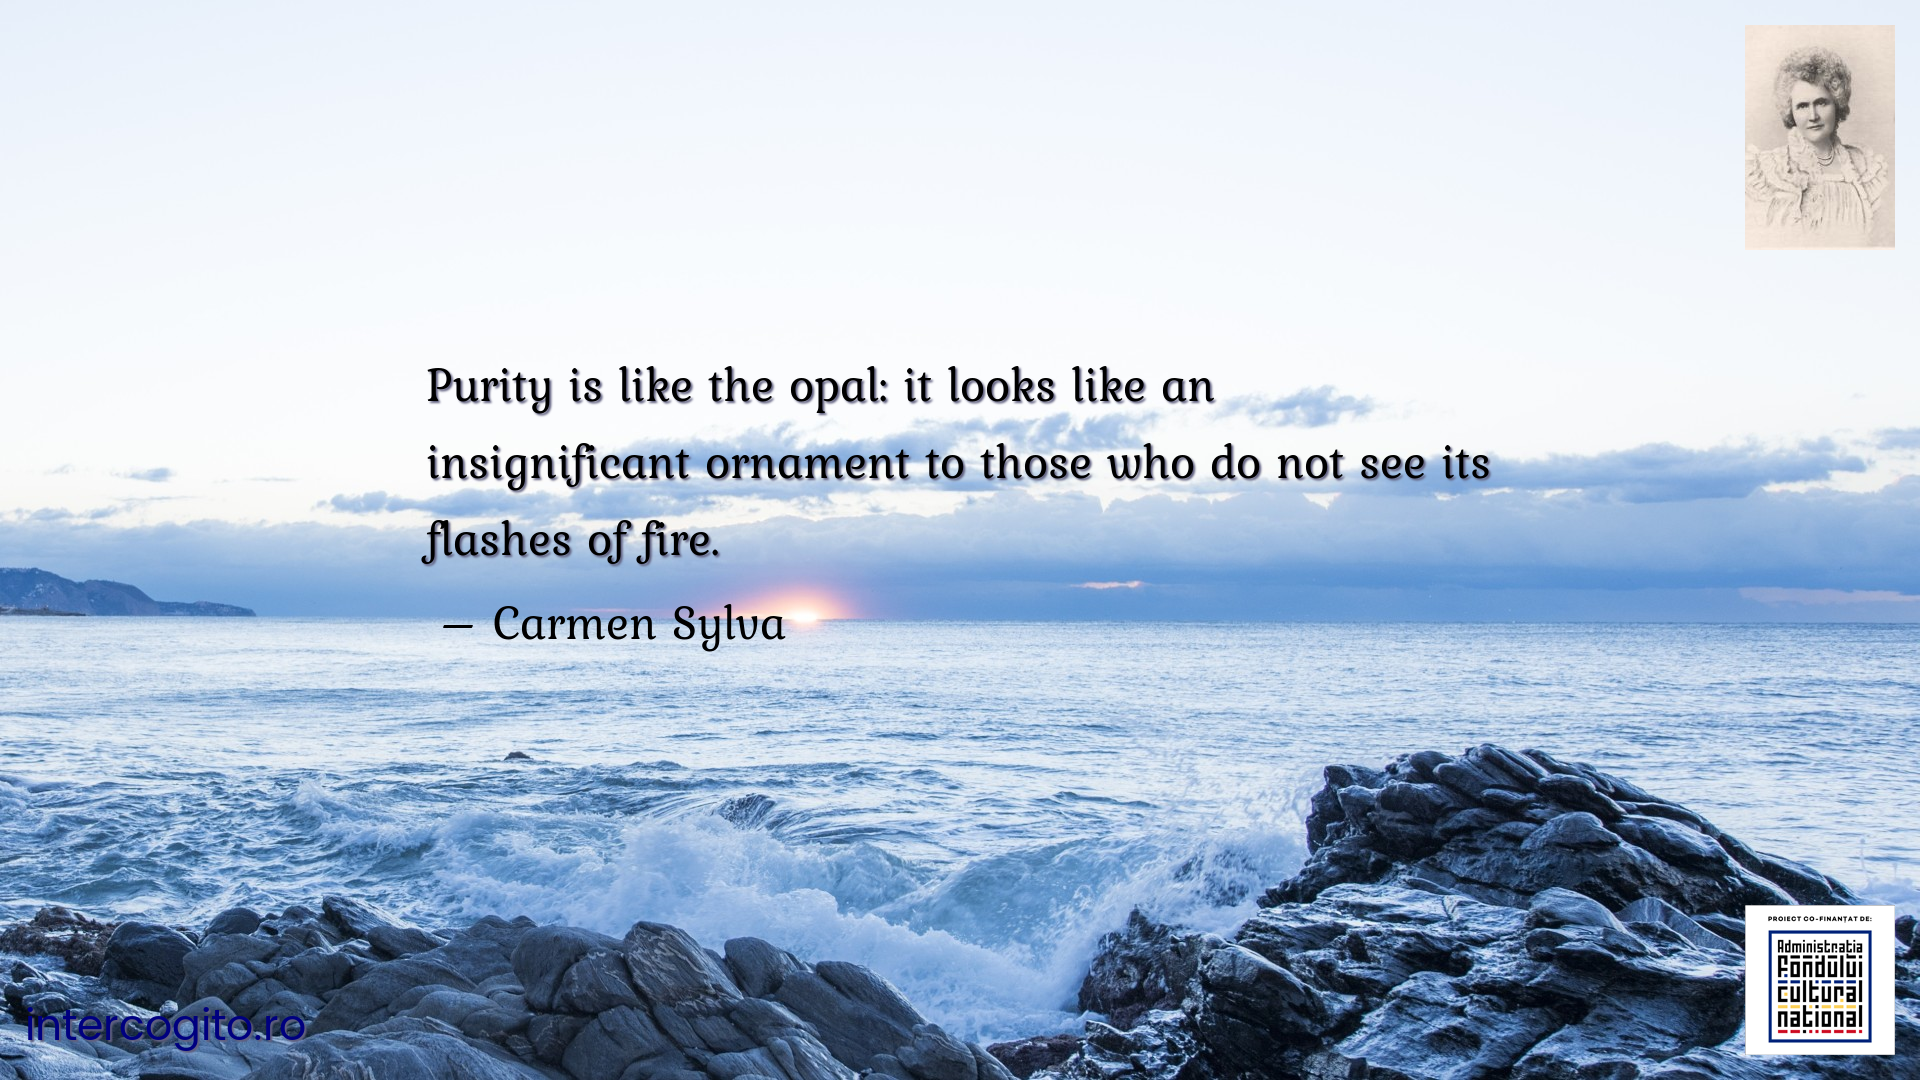 Purity is like the opal: it looks like an insignificant ornament to those who do not see its flashes of fire.